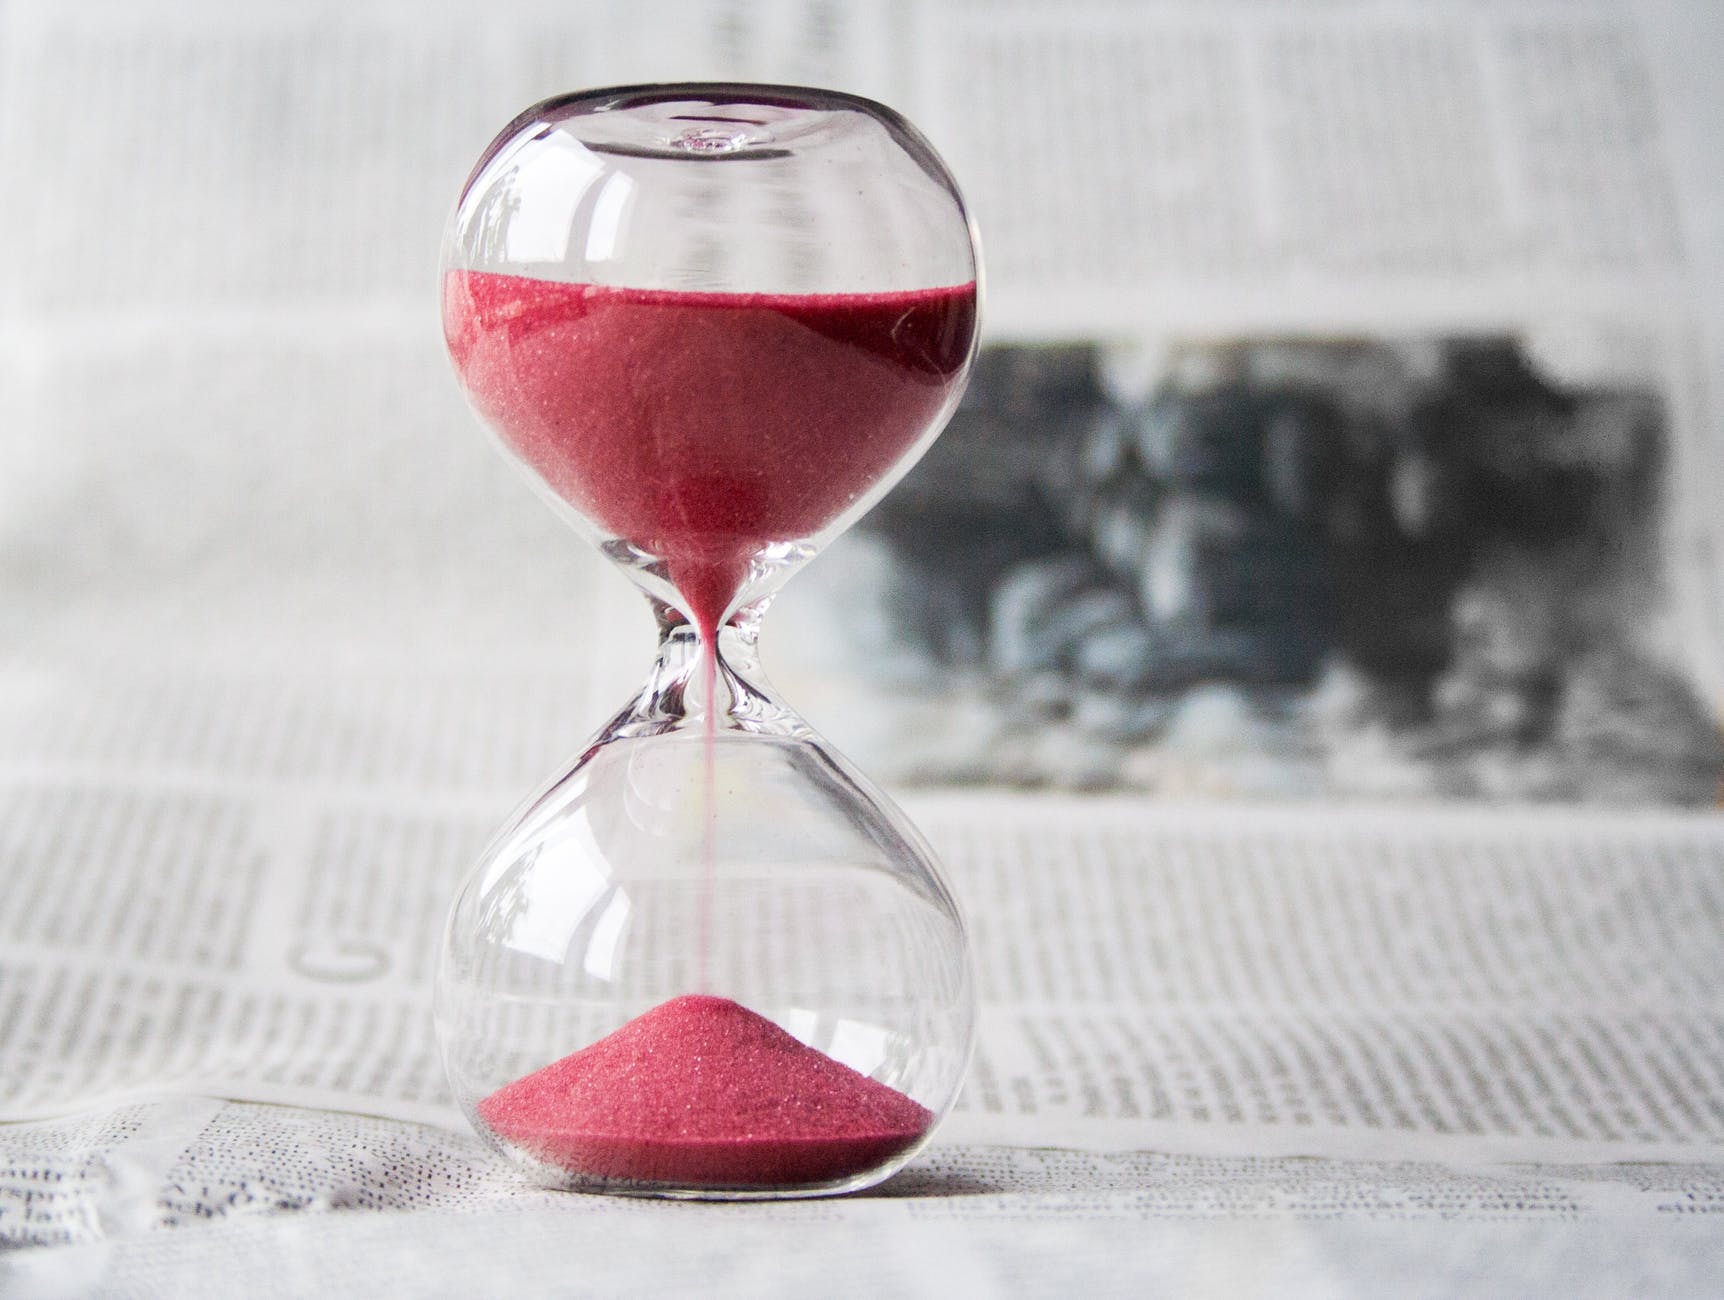 An hourglass with red sand inside. It is placed on top of some surface which seems to be covered in newspapers. When you have to pack in 7 days, every second counts.